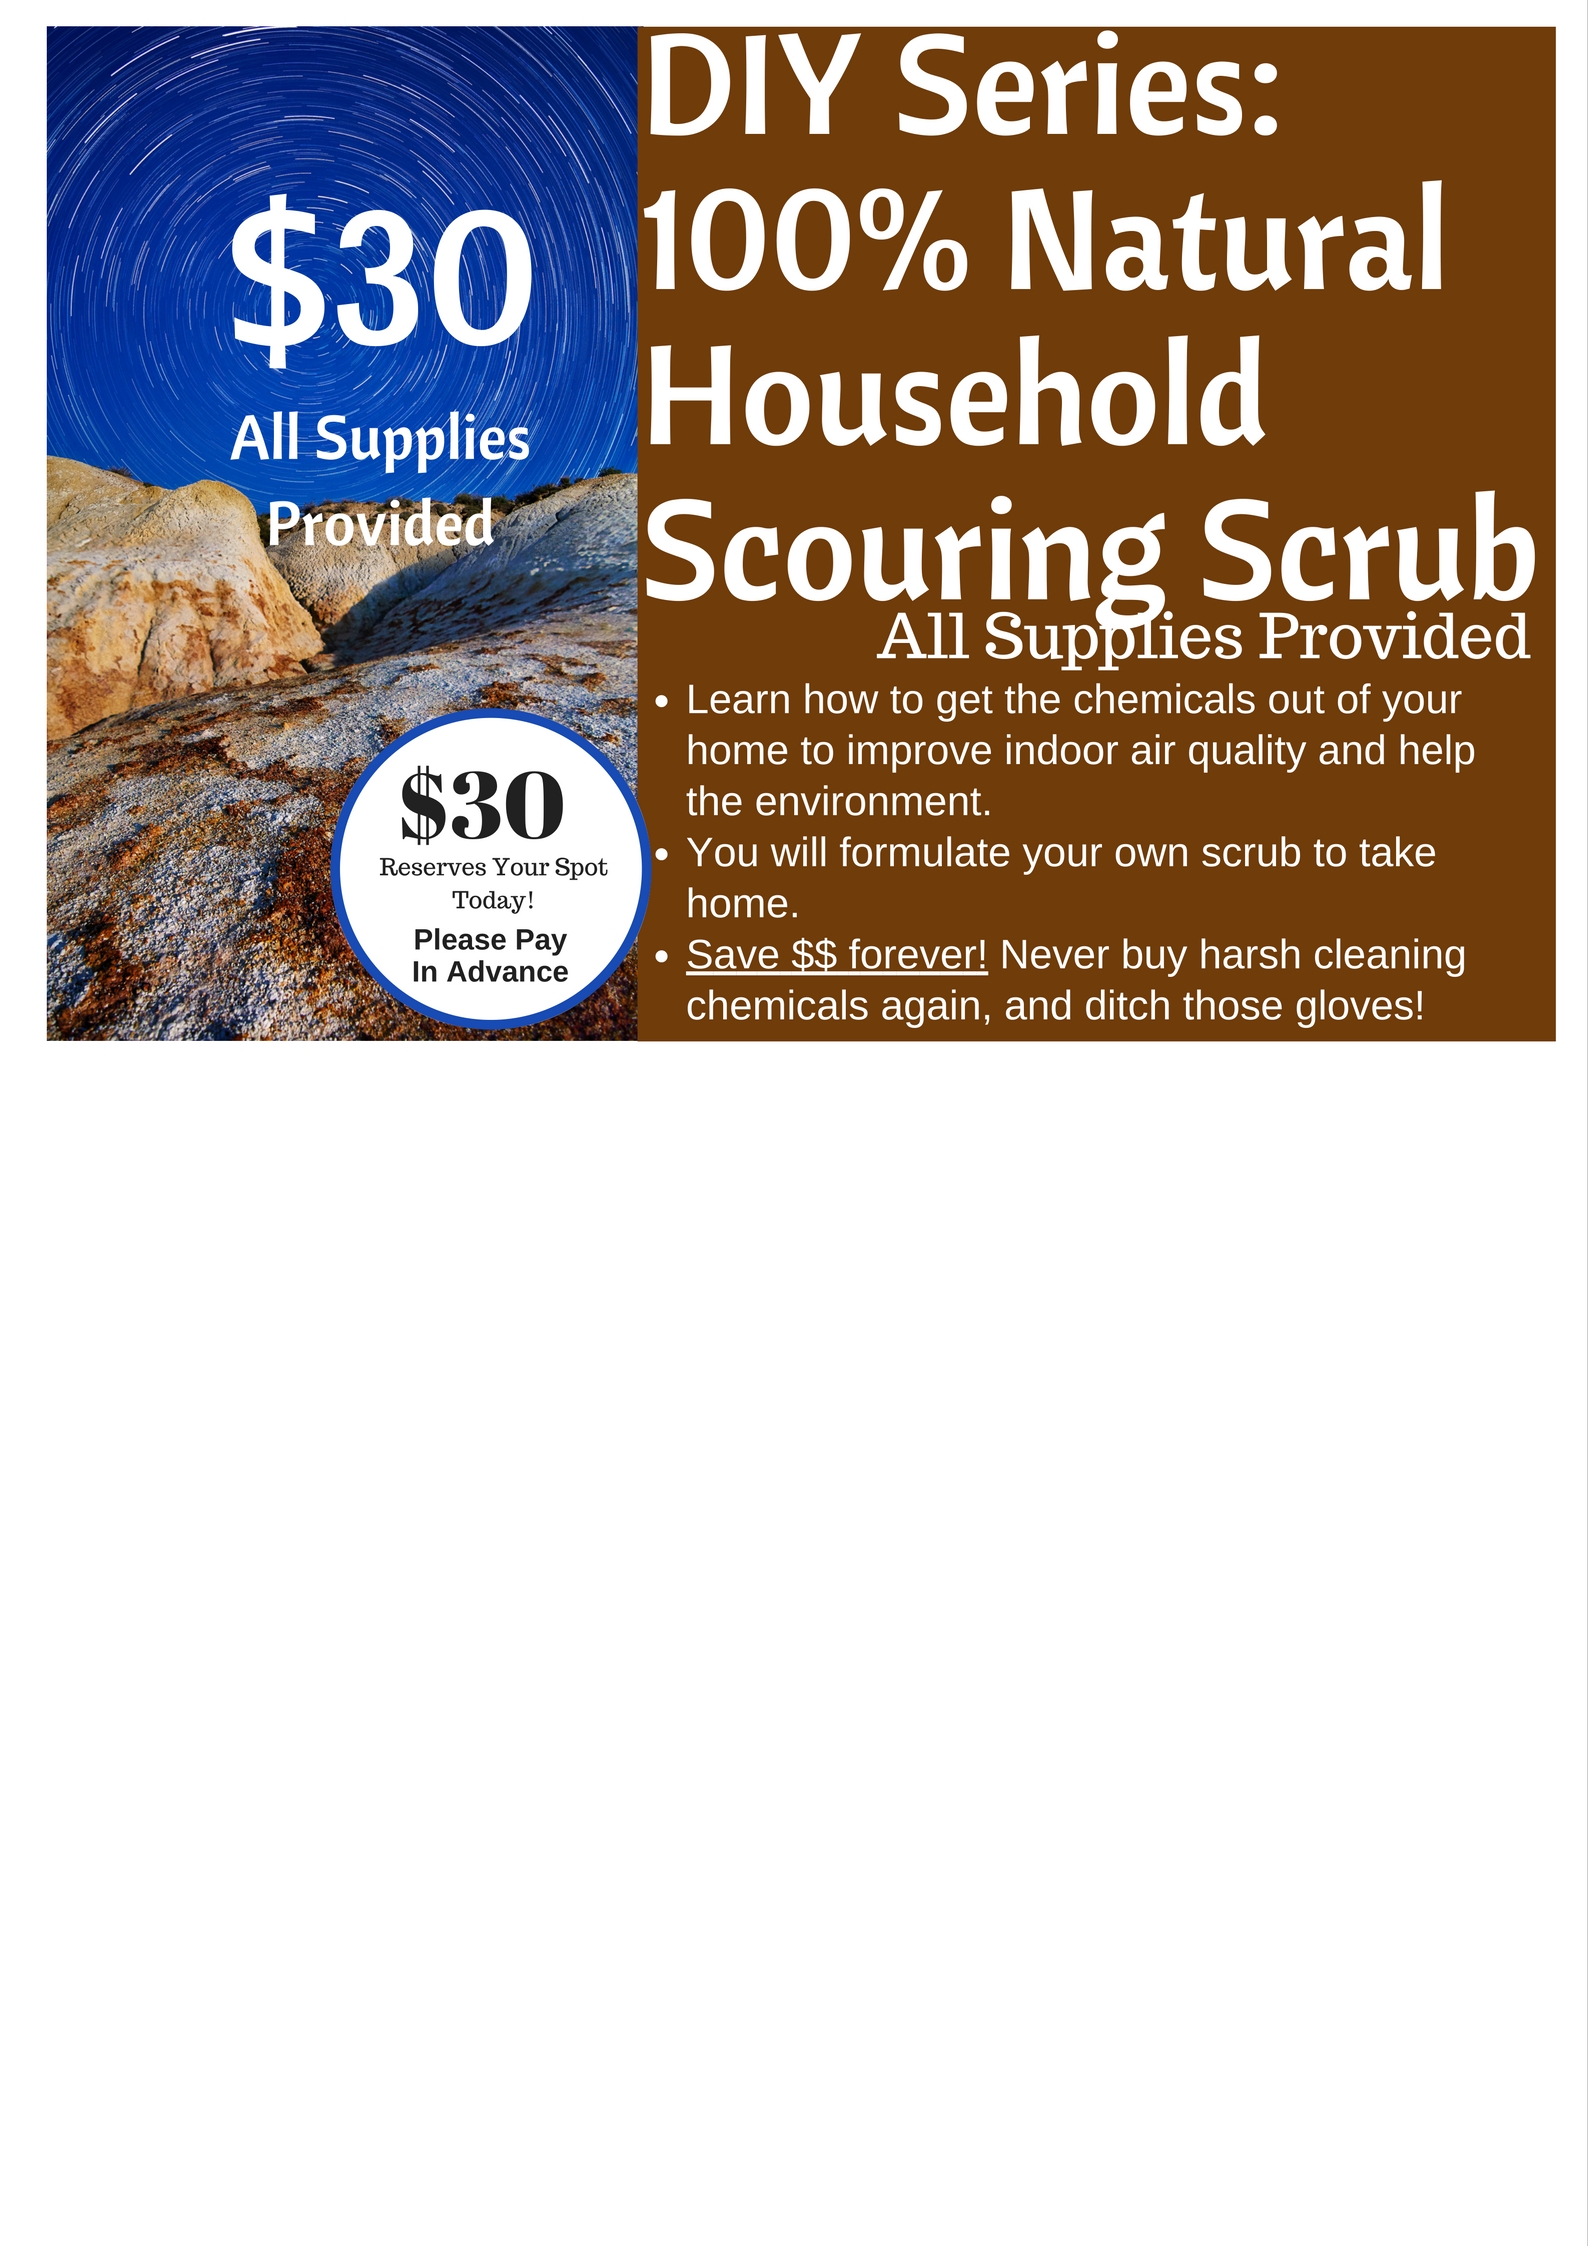 learn-to-make-natural-household-scrub-cleanser